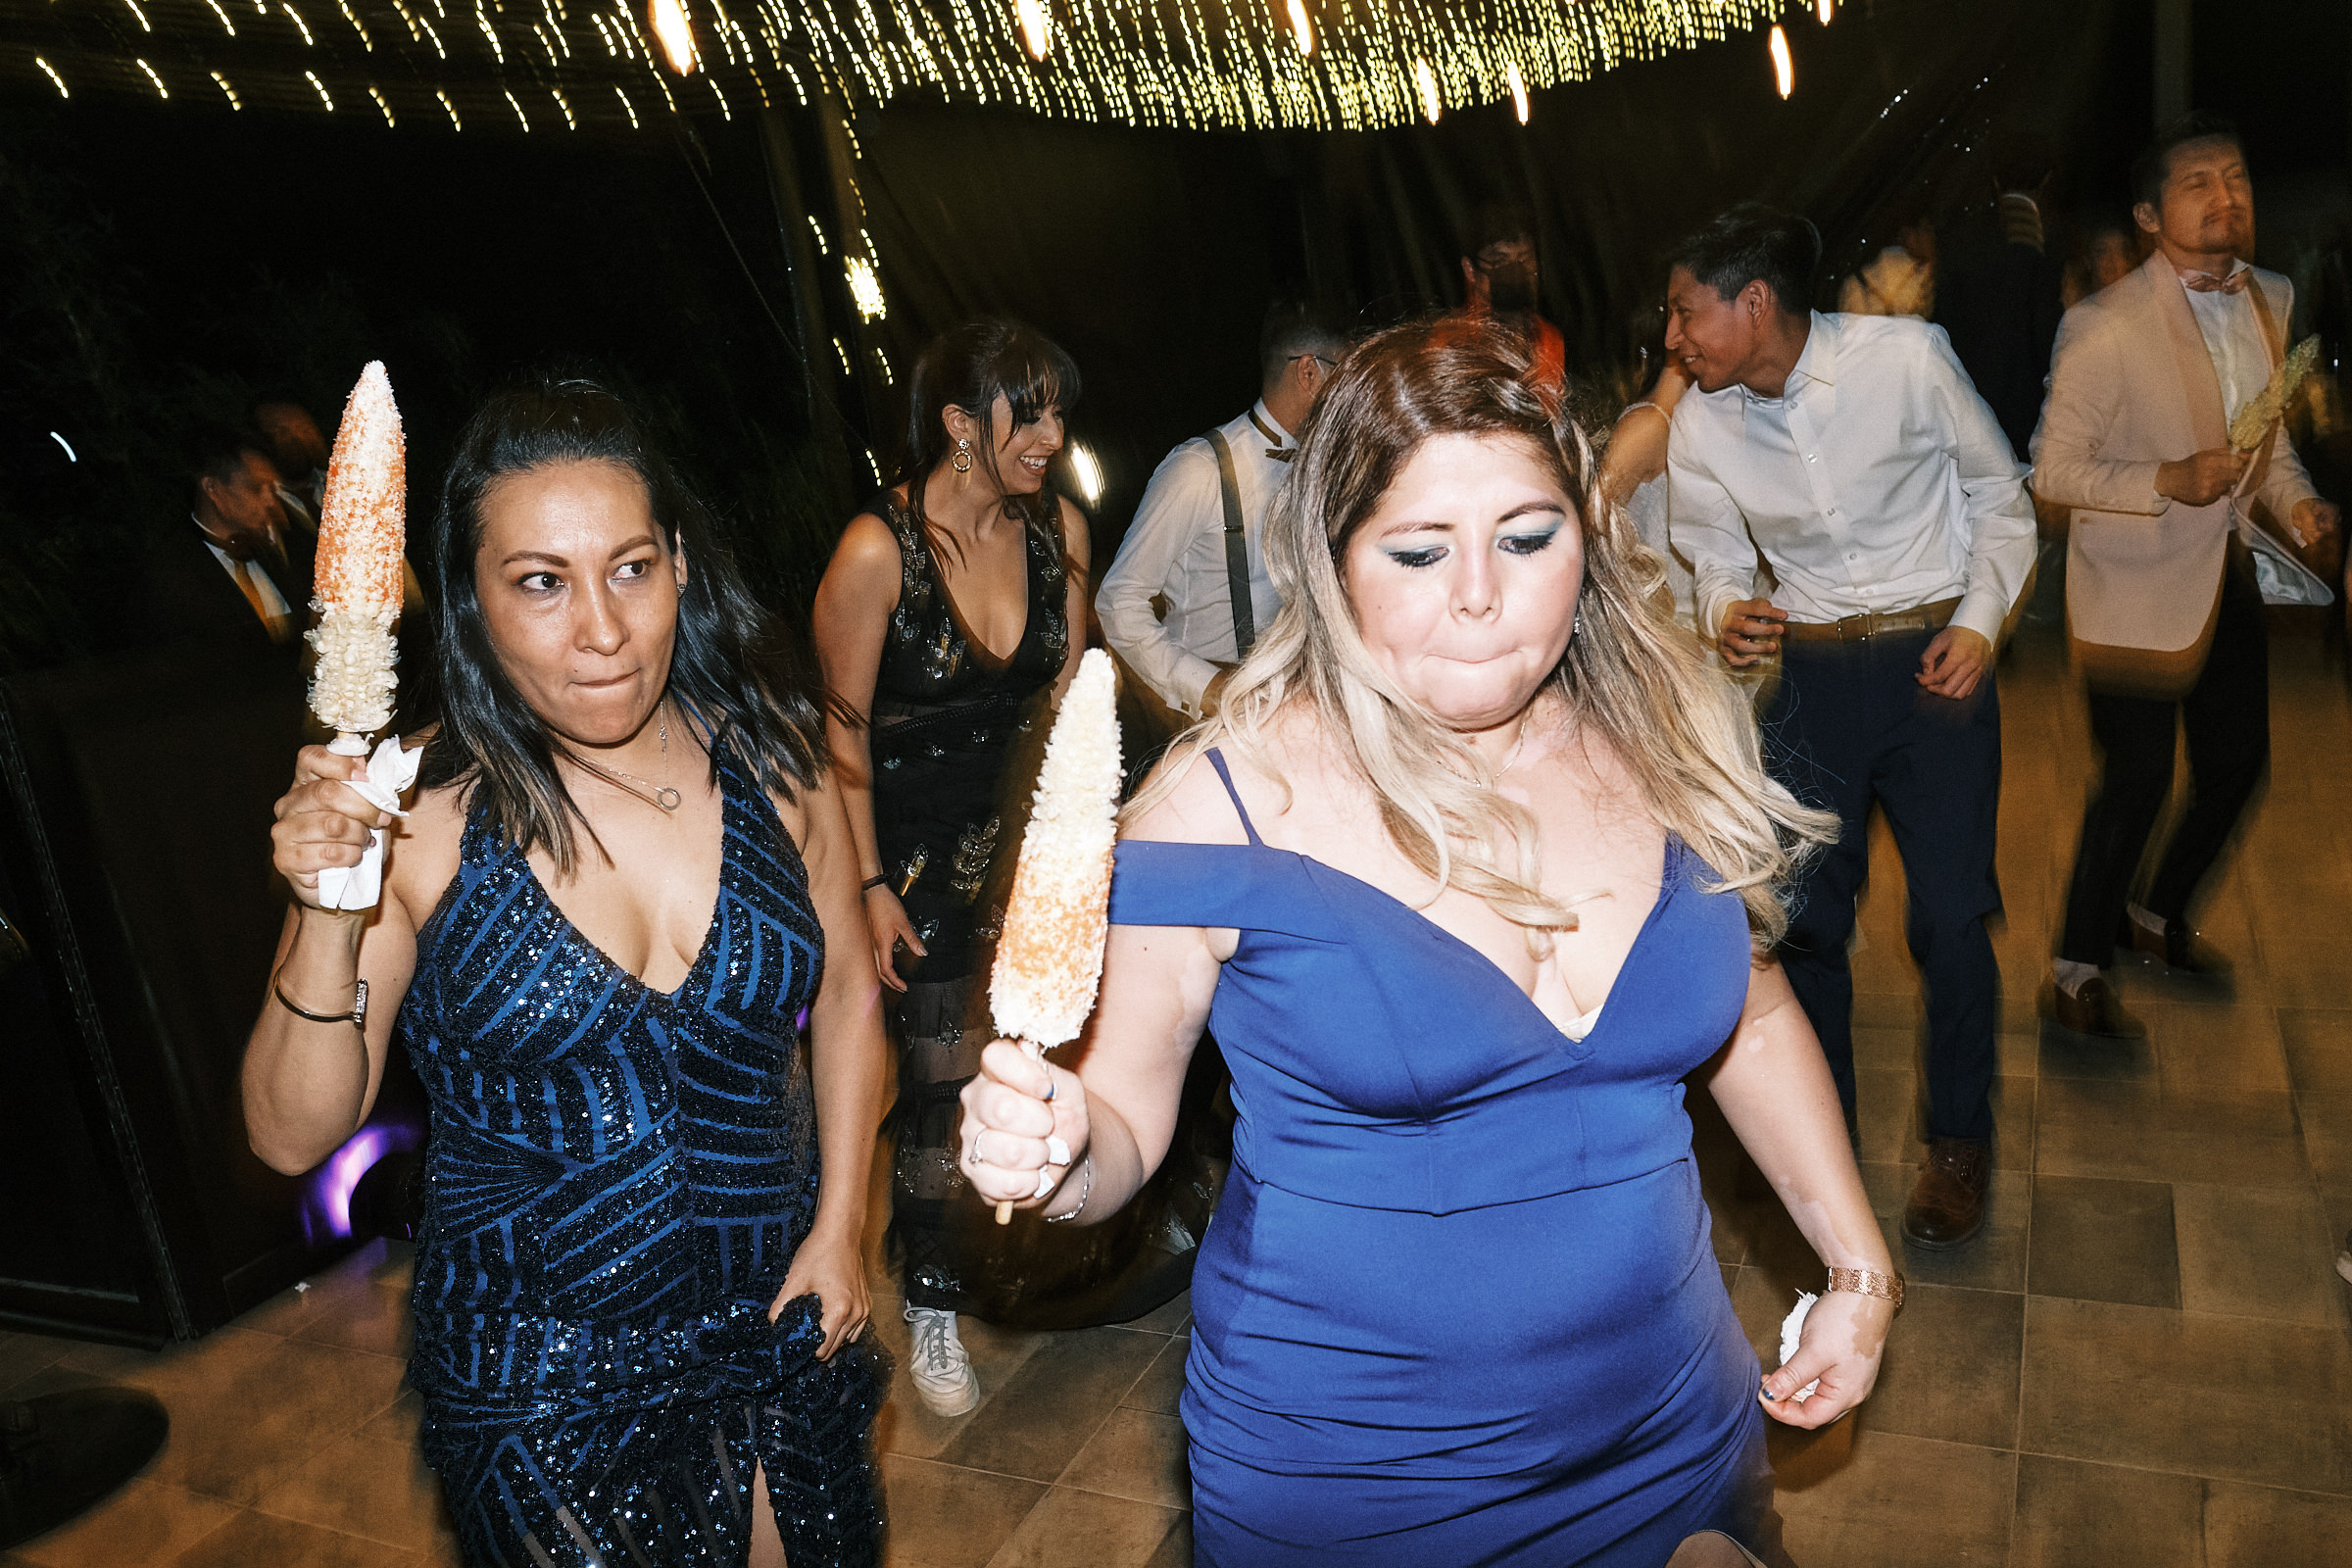 Wedding Guests Dance While Holding Corn In Mexican Wedding